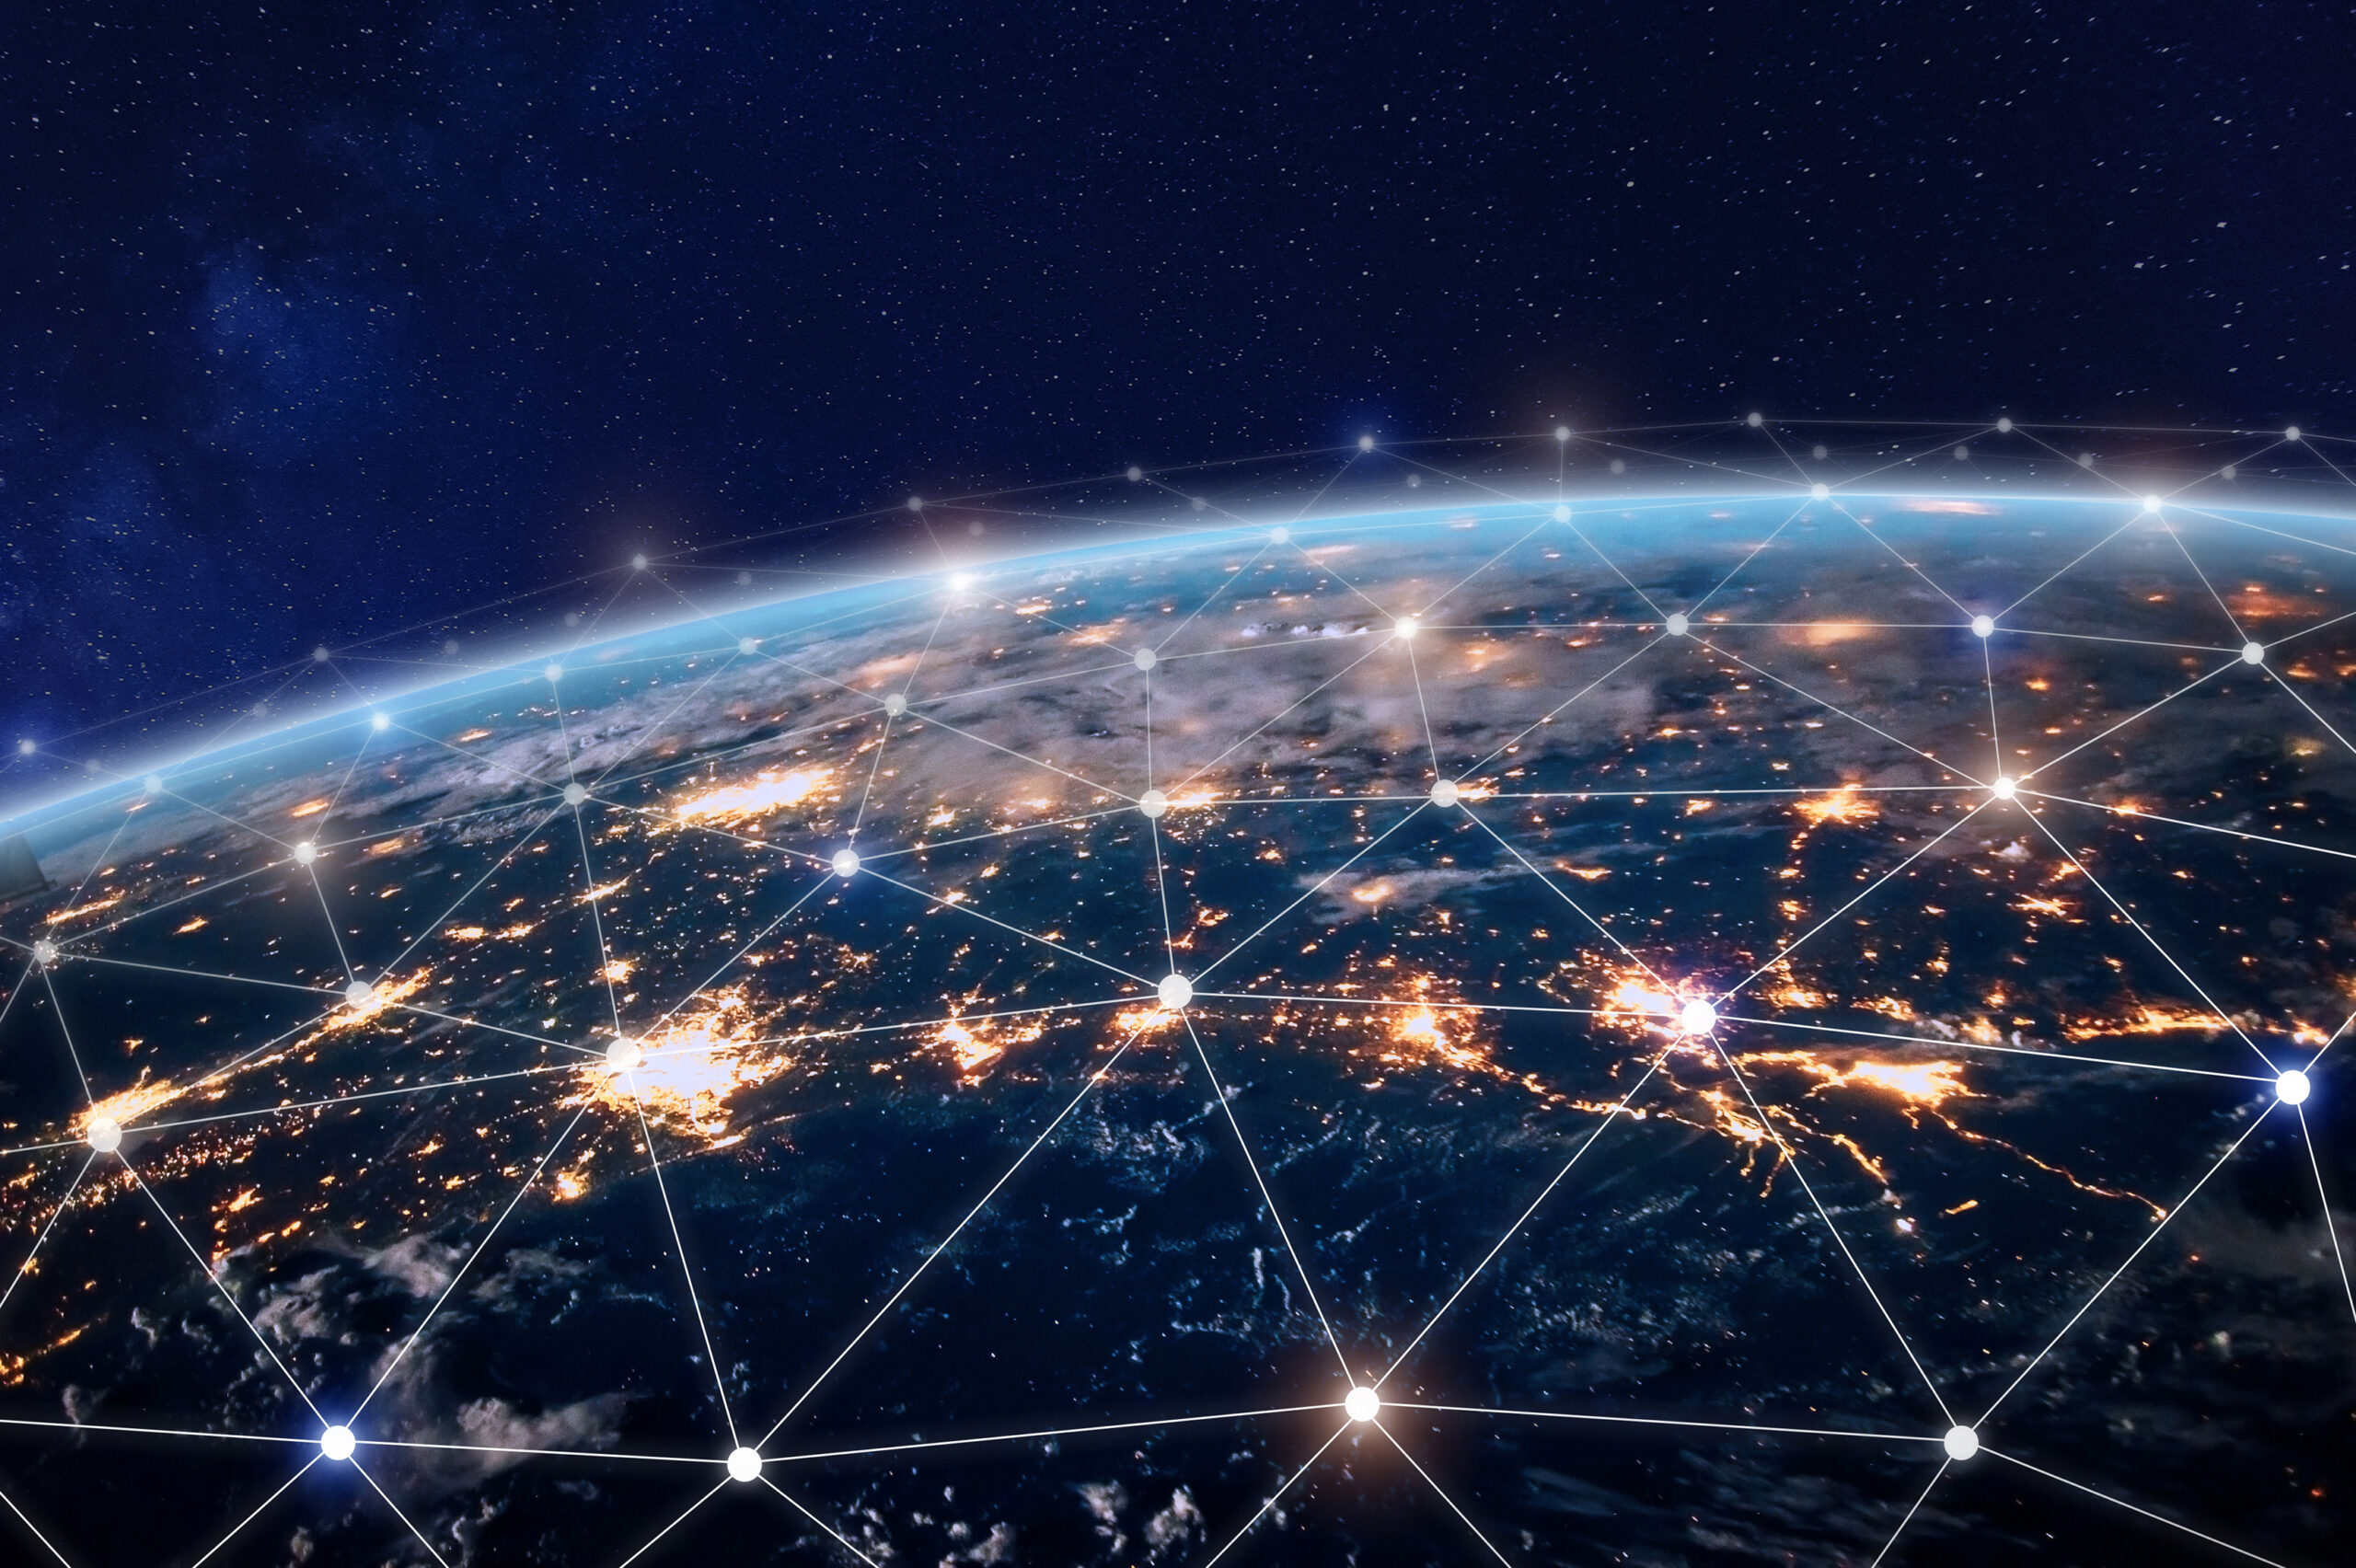 Seamlessly connect Ground-to-Space communication with innovative digital and
engineering solutions for a more connected world